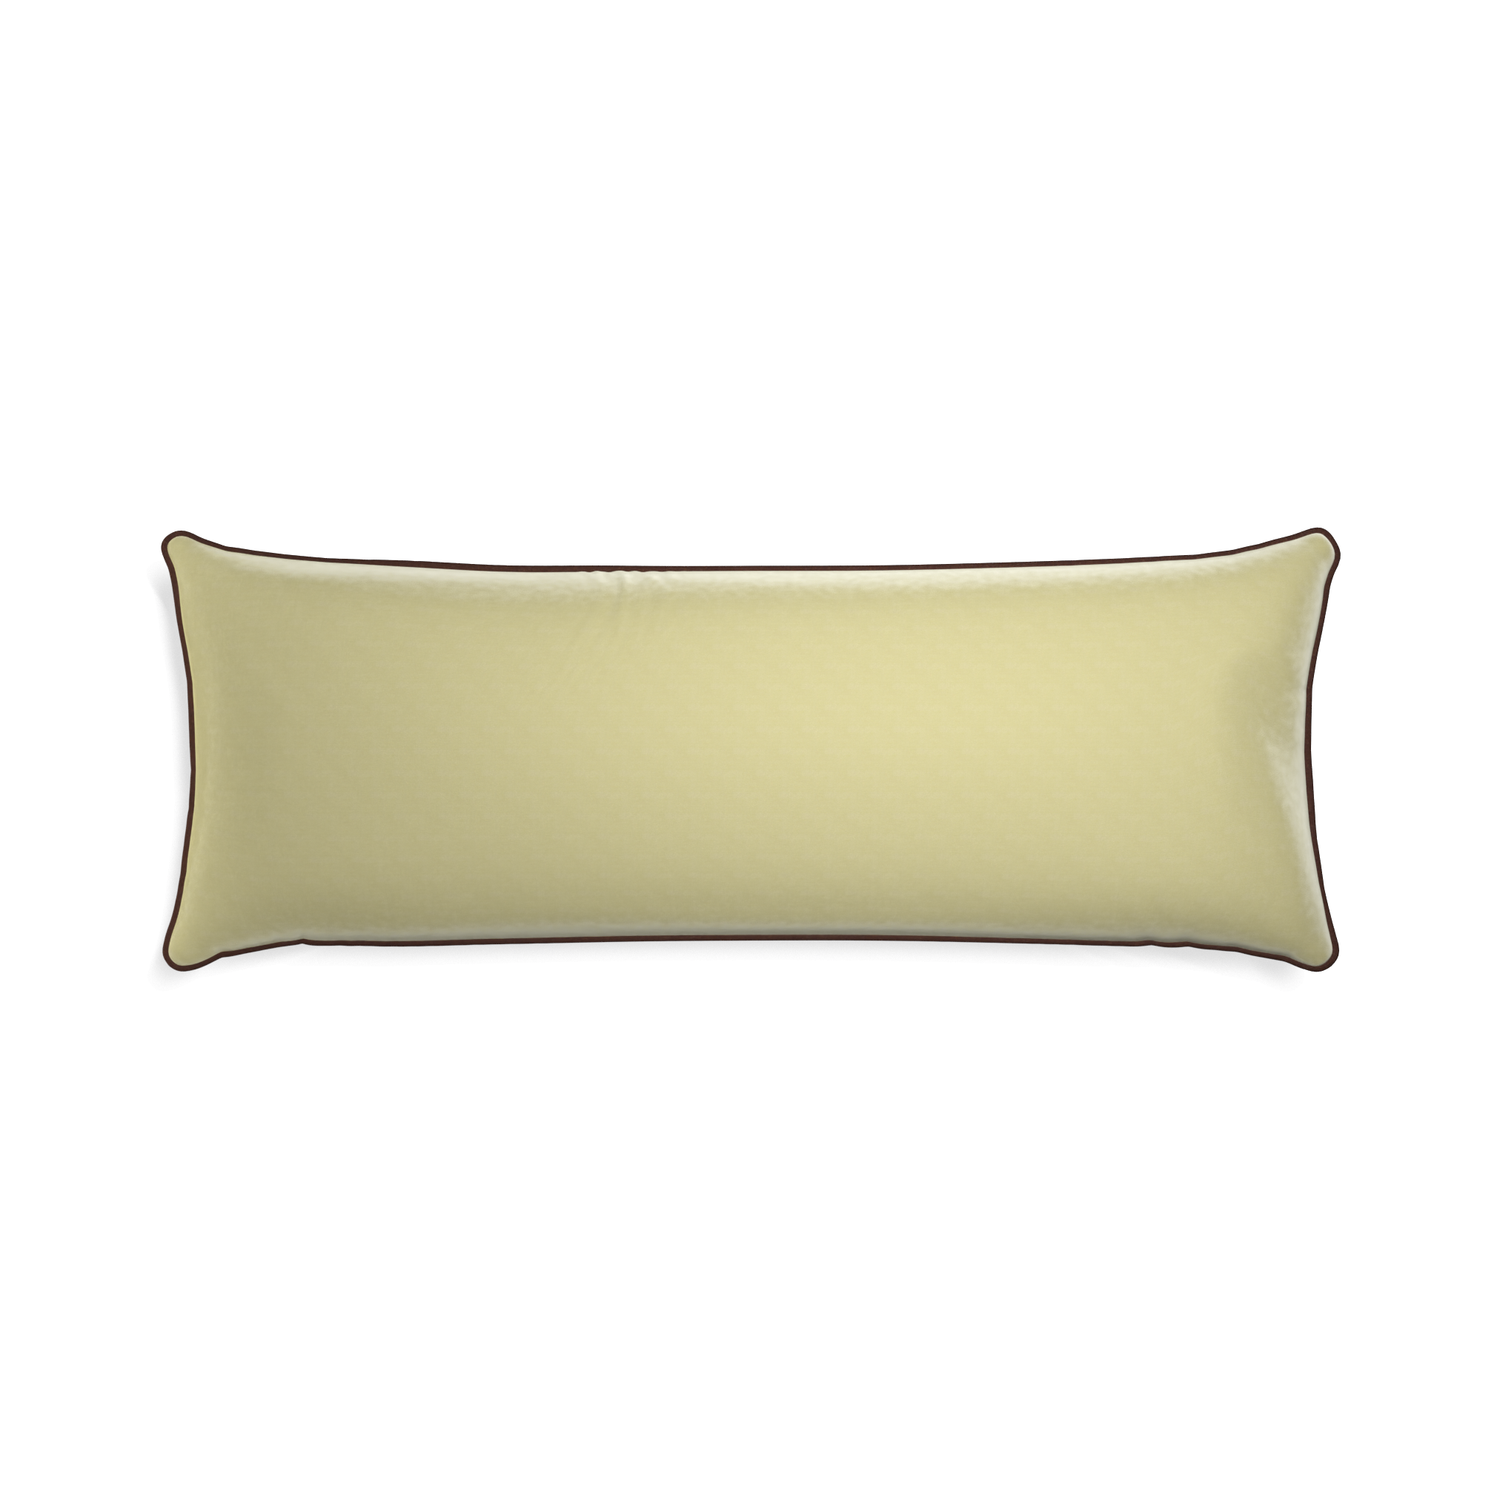 Xl-lumbar pear velvet custom light greenpillow with w piping on white background